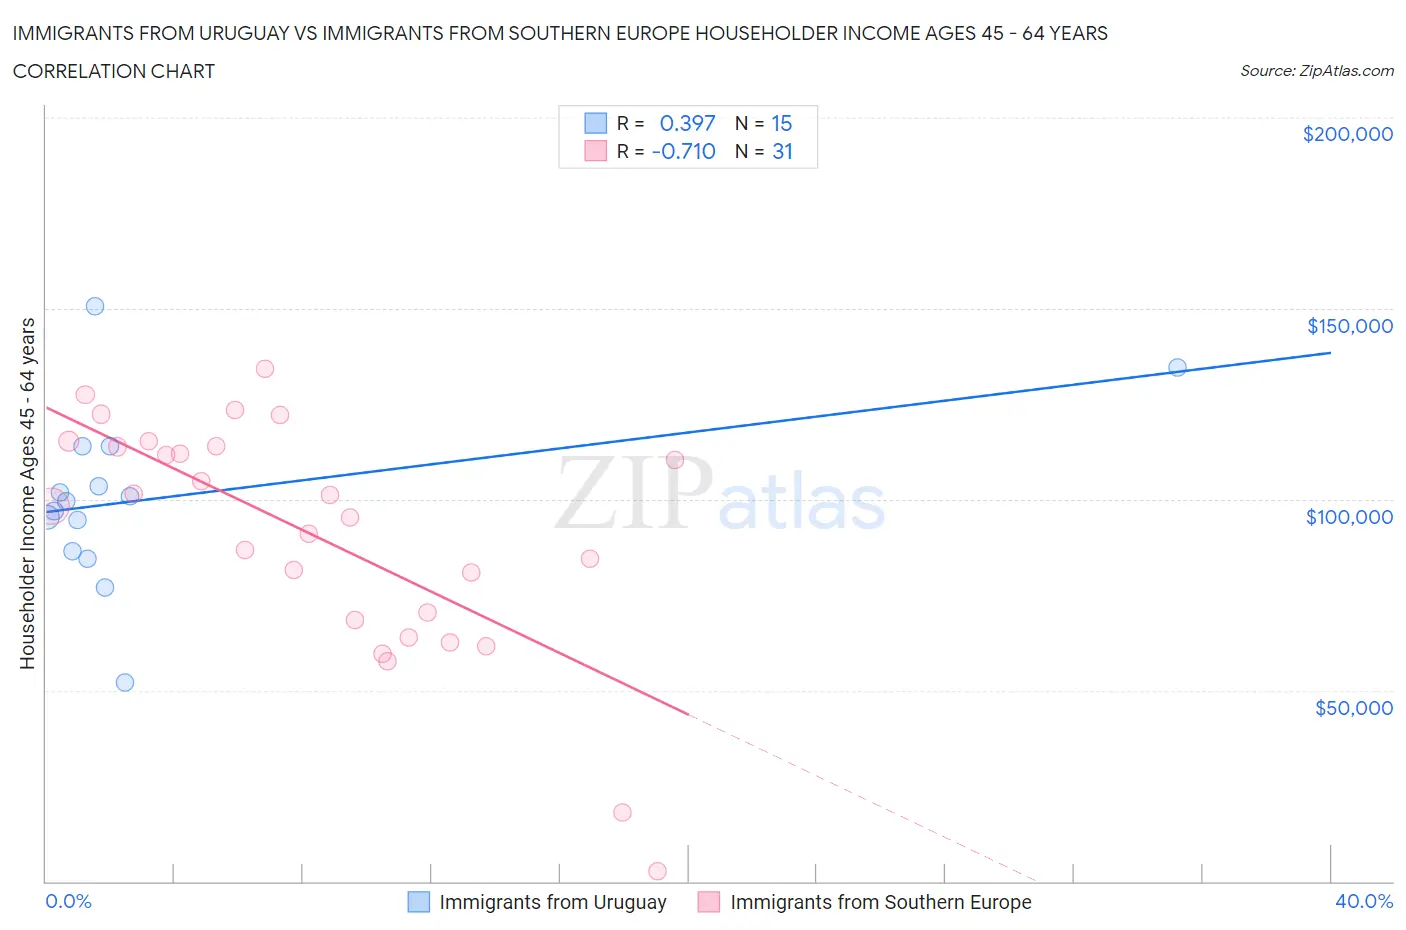 Immigrants from Uruguay vs Immigrants from Southern Europe Householder Income Ages 45 - 64 years